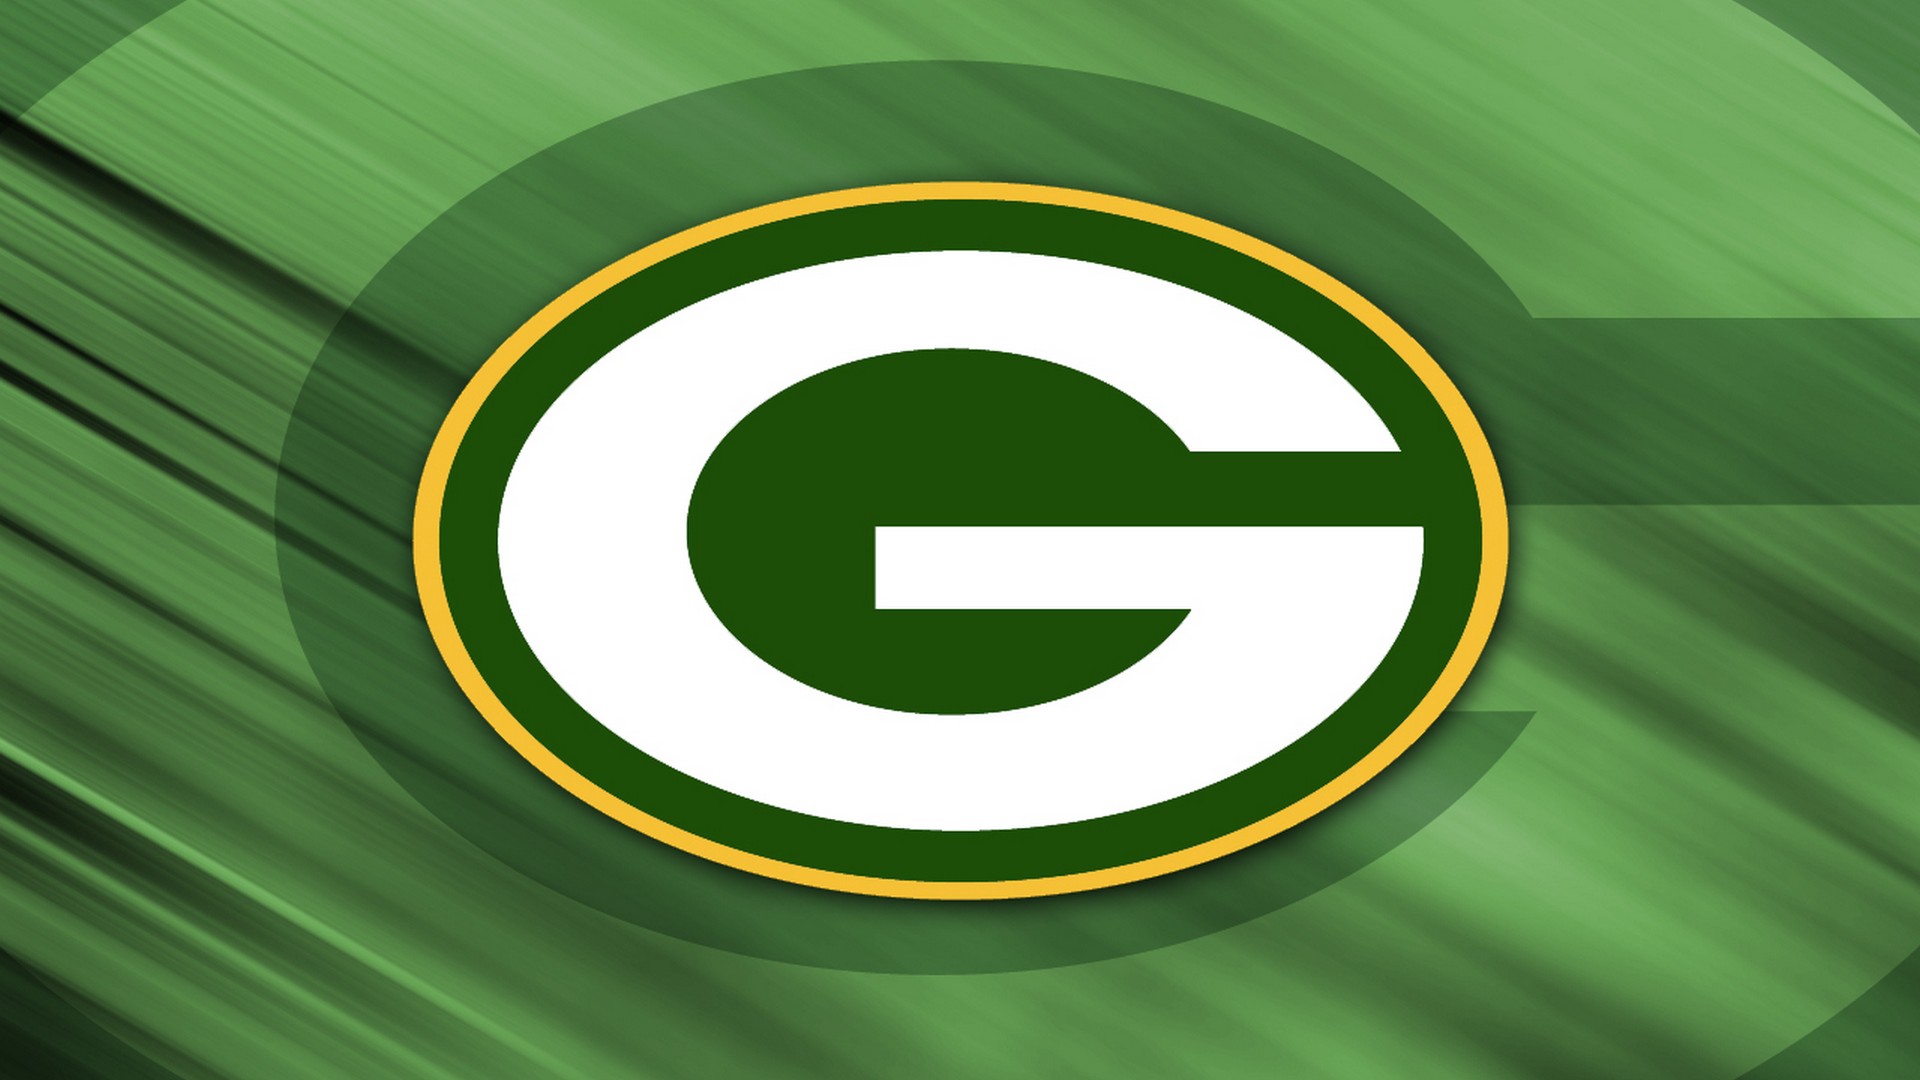 Green Bay Packers Backgrounds HD 1920x1080